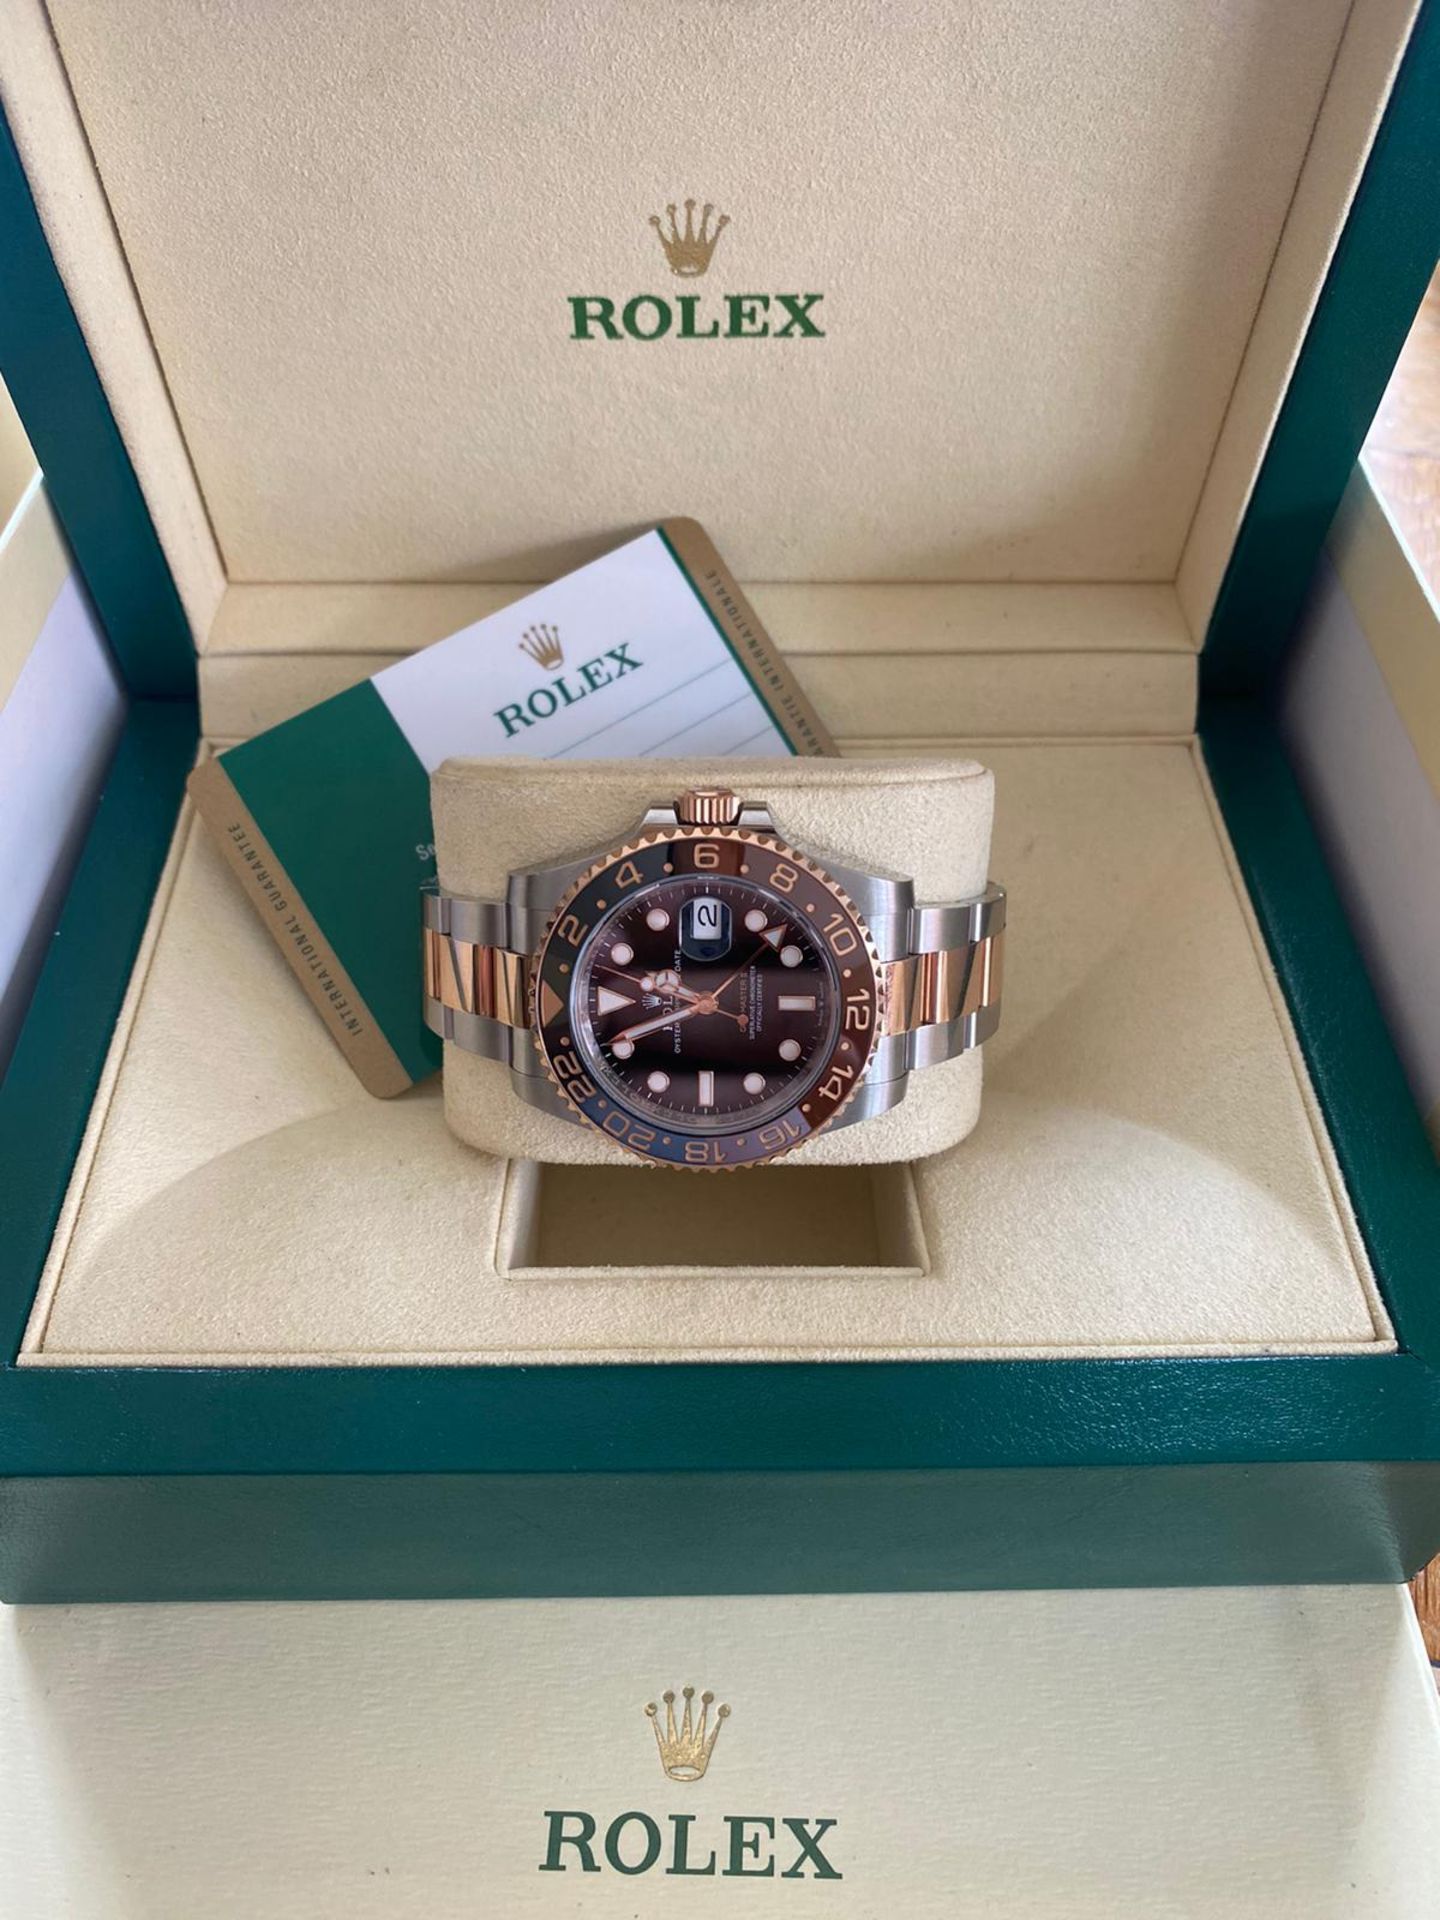 2019 ROLEX GMT MASTER II ROOT BEER WATCH LOCATION NORTH YORKSHIRE - Image 4 of 4